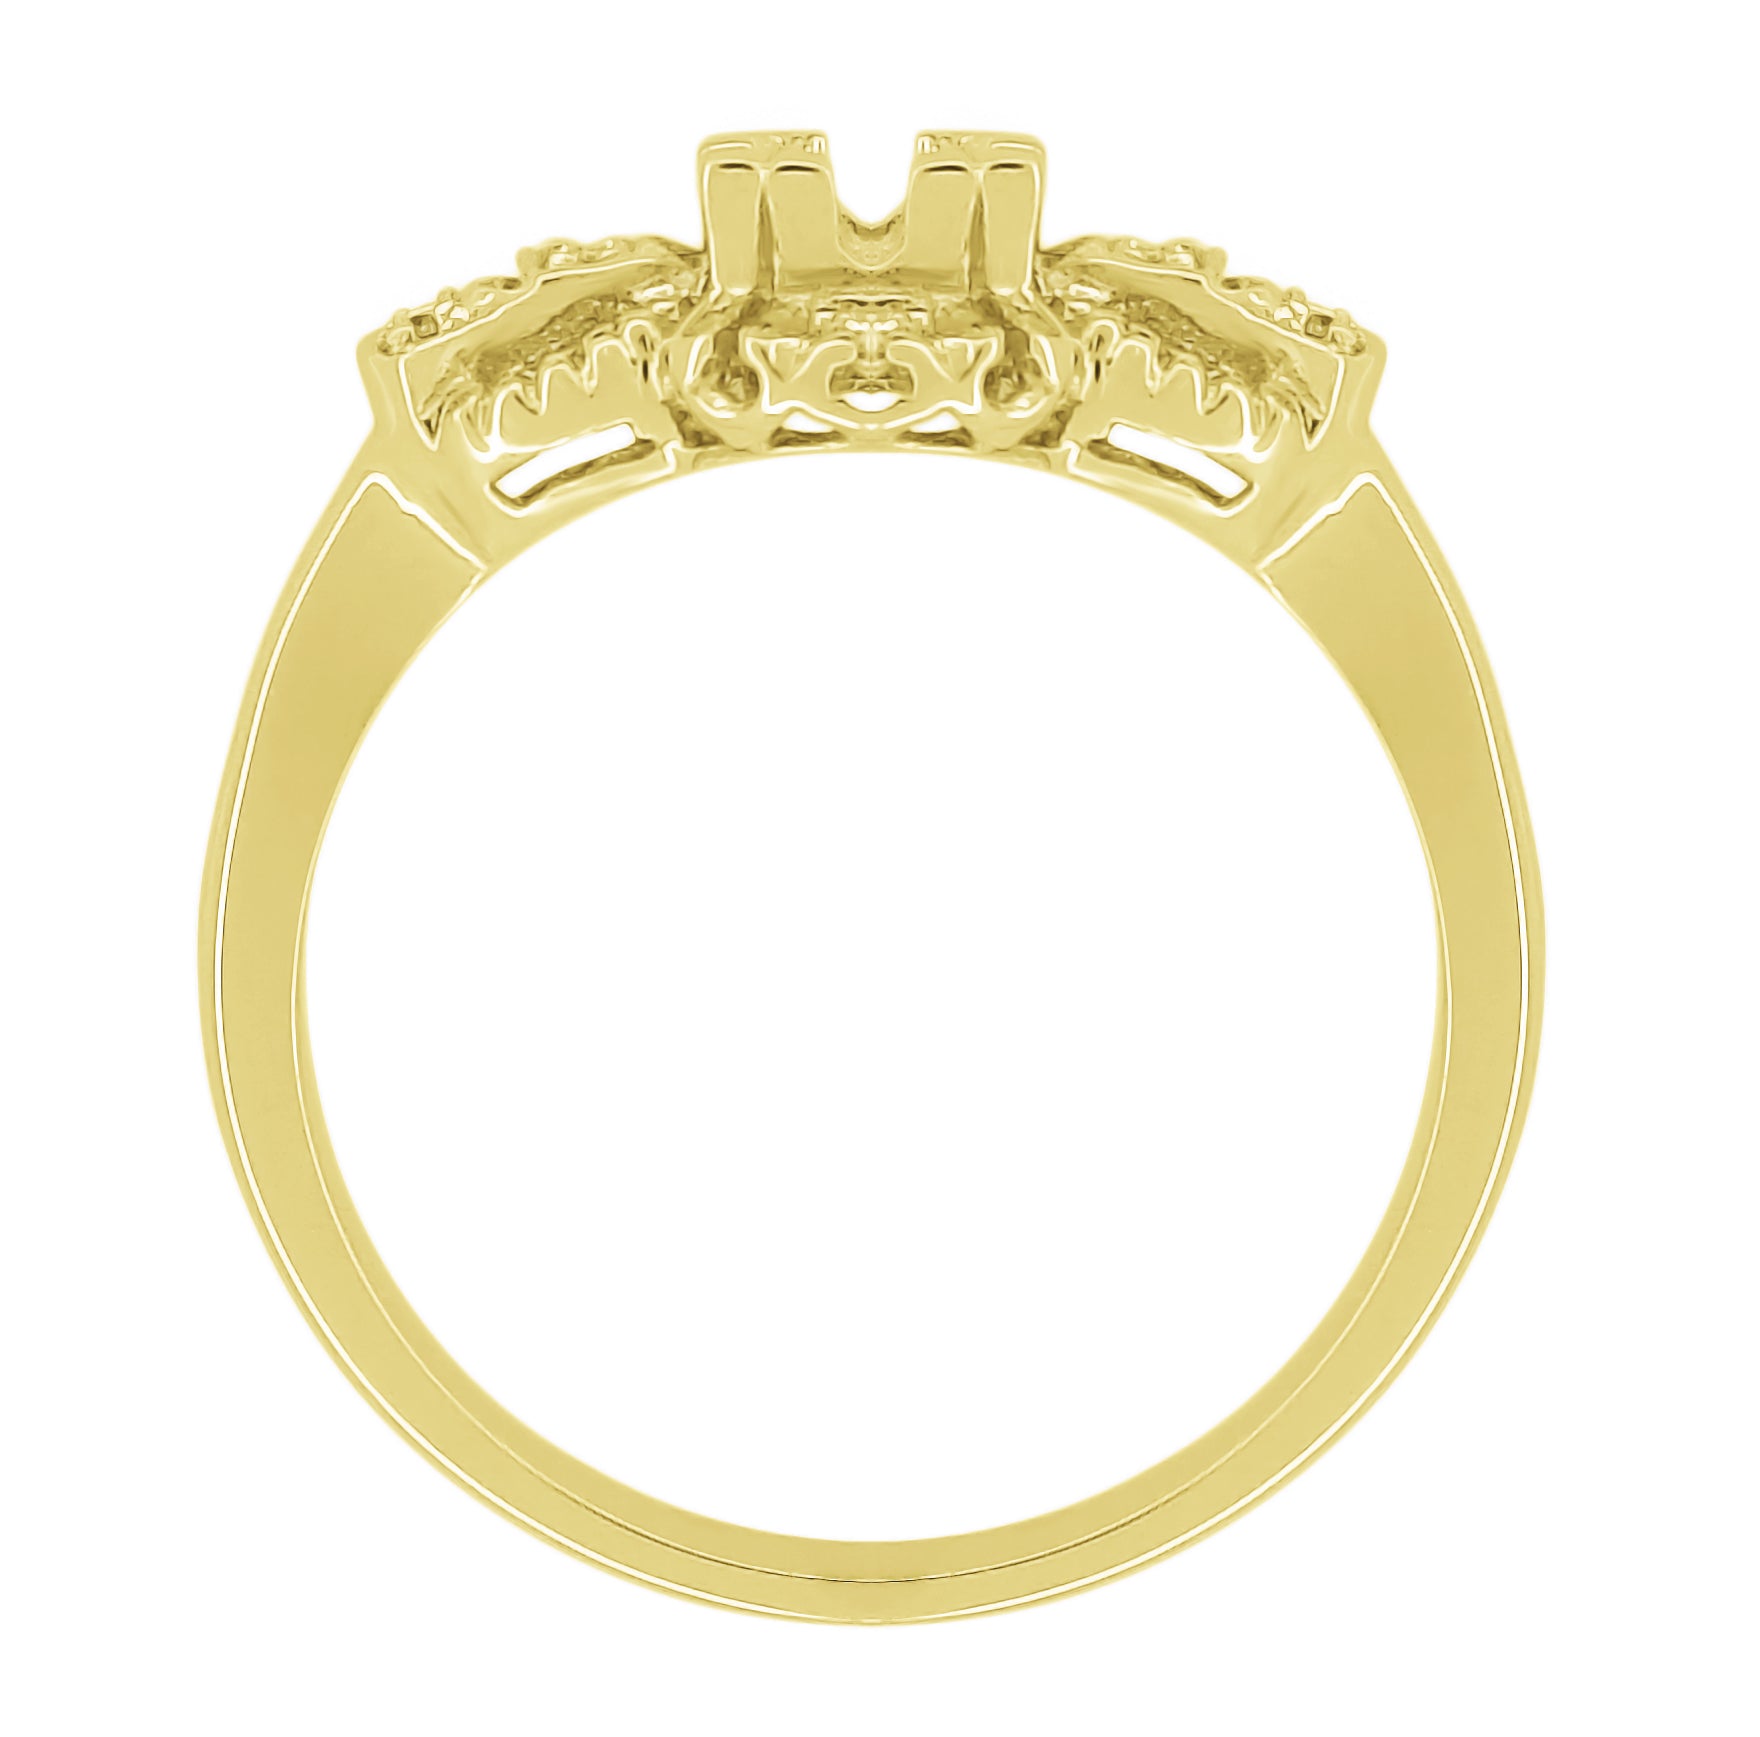 1920's East to West Yellow Gold Engagement Ring Semimount for a 1/4 Carat Round Diamond - Item: R680Y - Image: 3